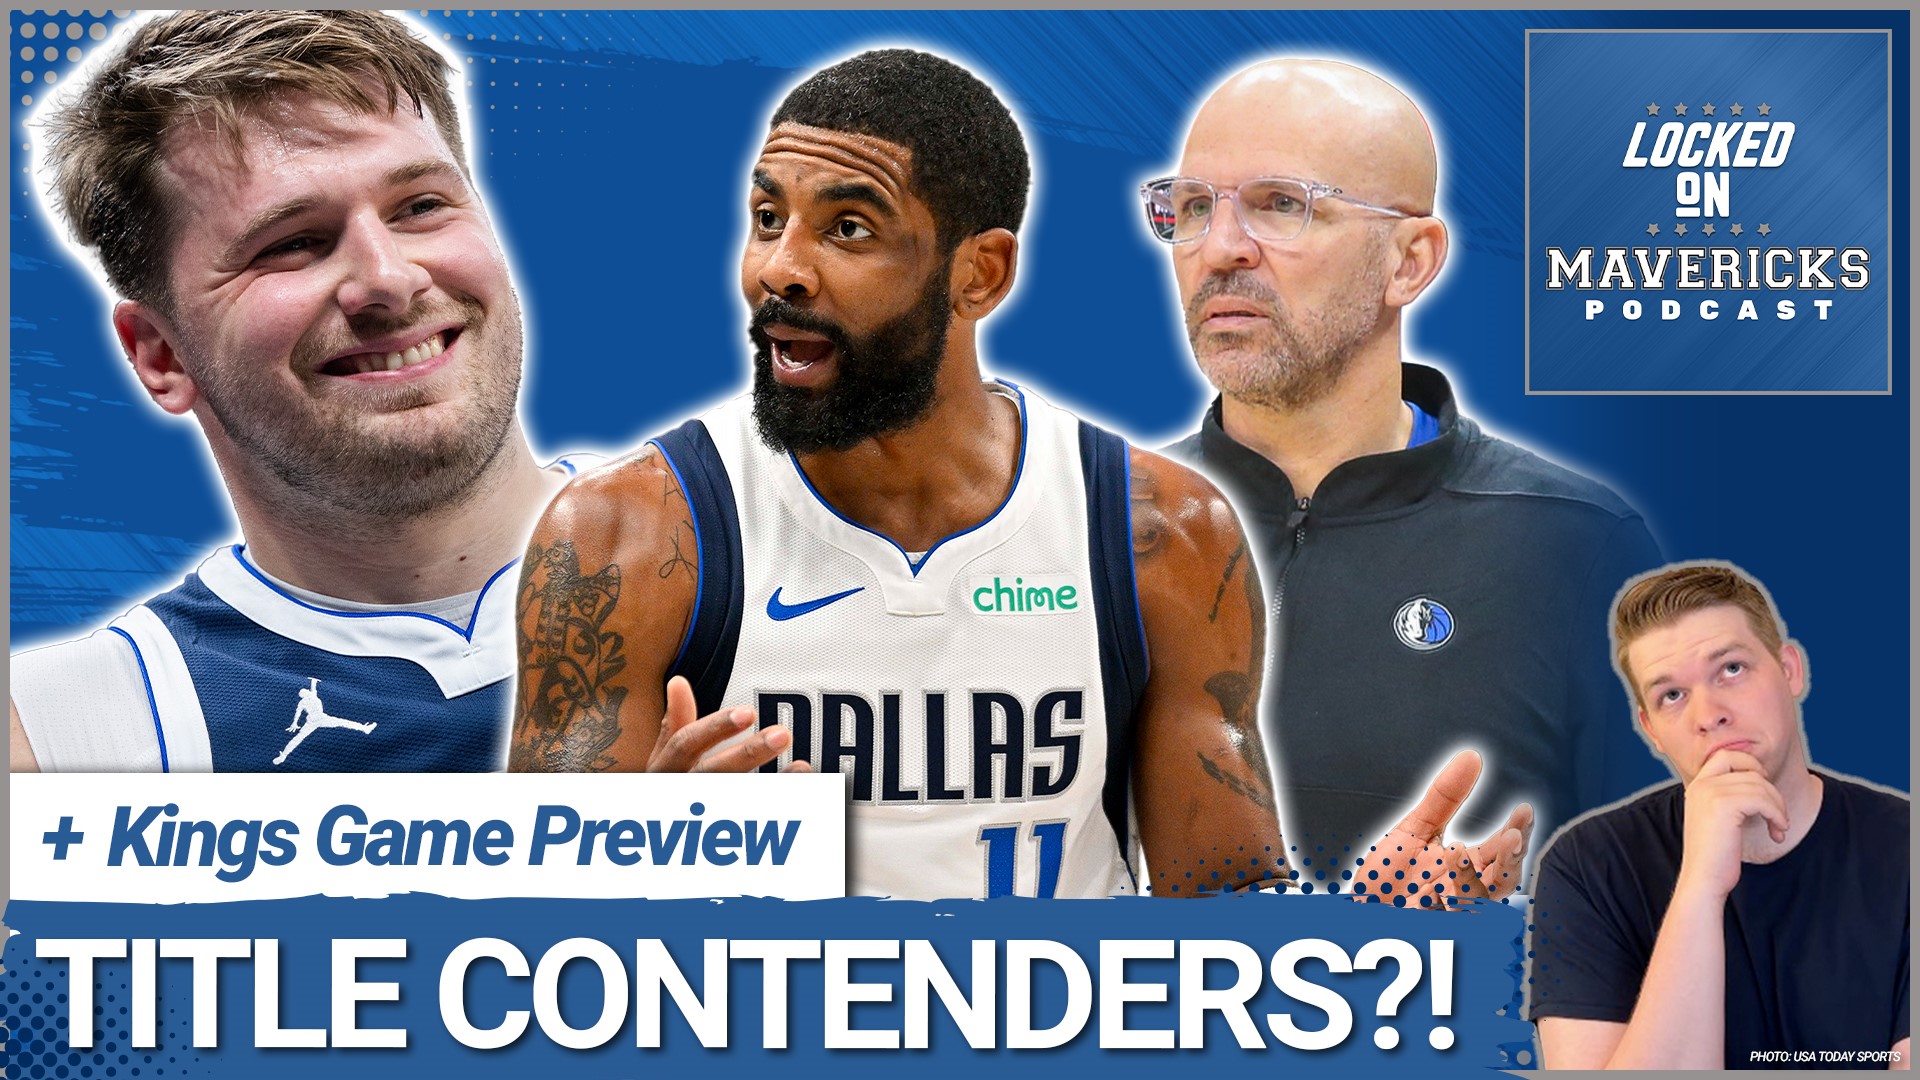 Nick Angstadt asks if the Dallas Mavericks should be considered Title Contenders powered by Luka Doncic & Kyrie Irving. What holds the Mavs back?